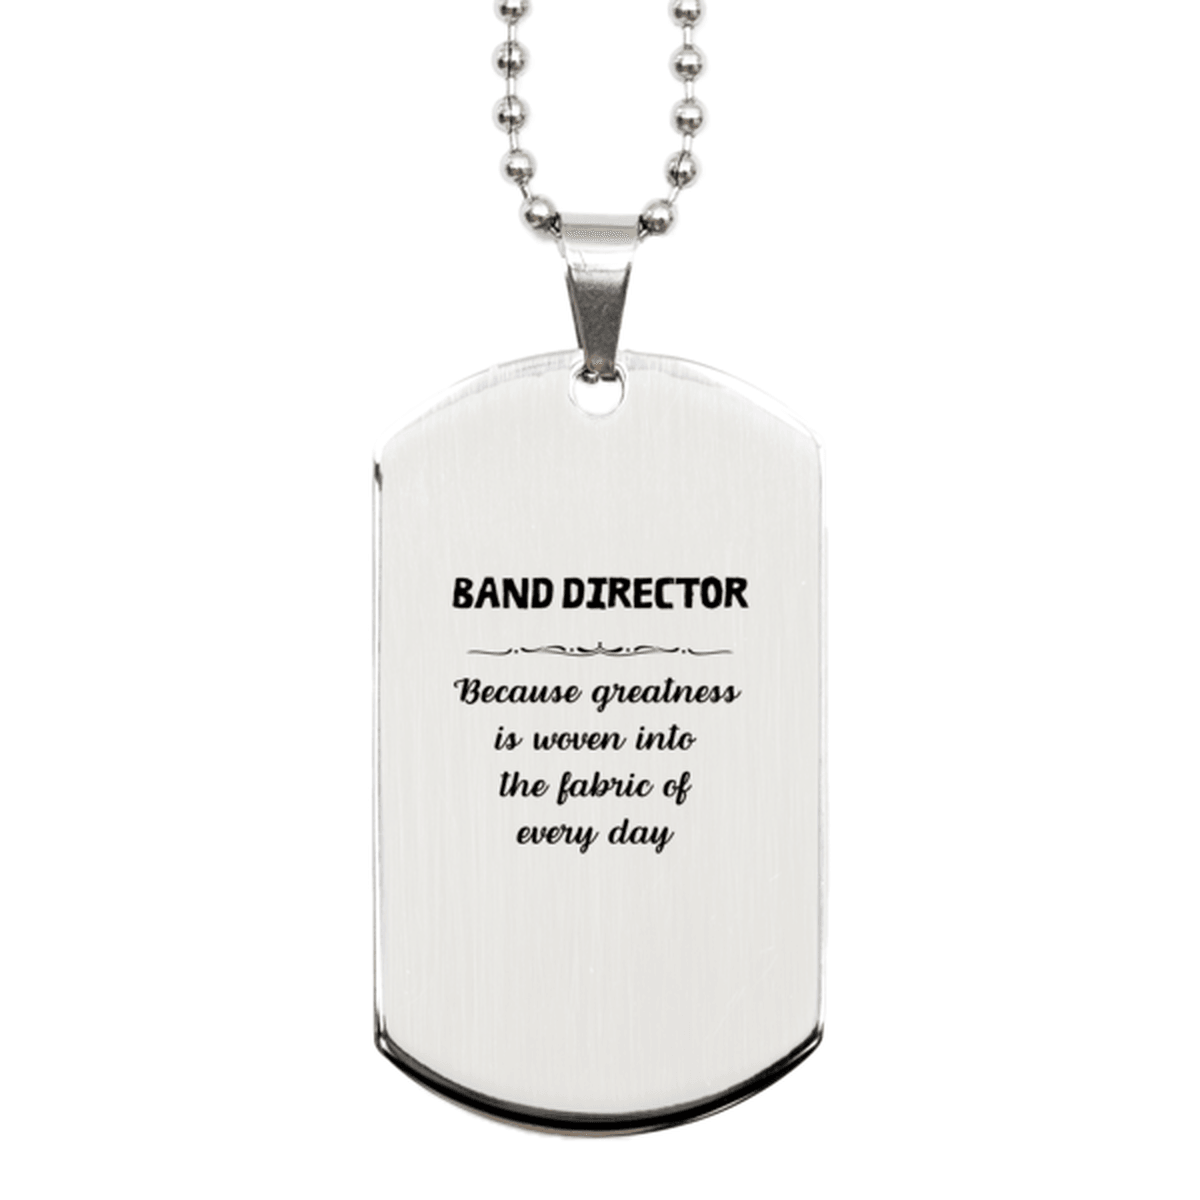 Sarcastic Band Director Silver Dog Tag Gifts, Christmas Holiday Gifts for Band Director Birthday, Band Director: Because greatness is woven into the fabric of every day, Coworkers, Friends - Mallard Moon Gift Shop